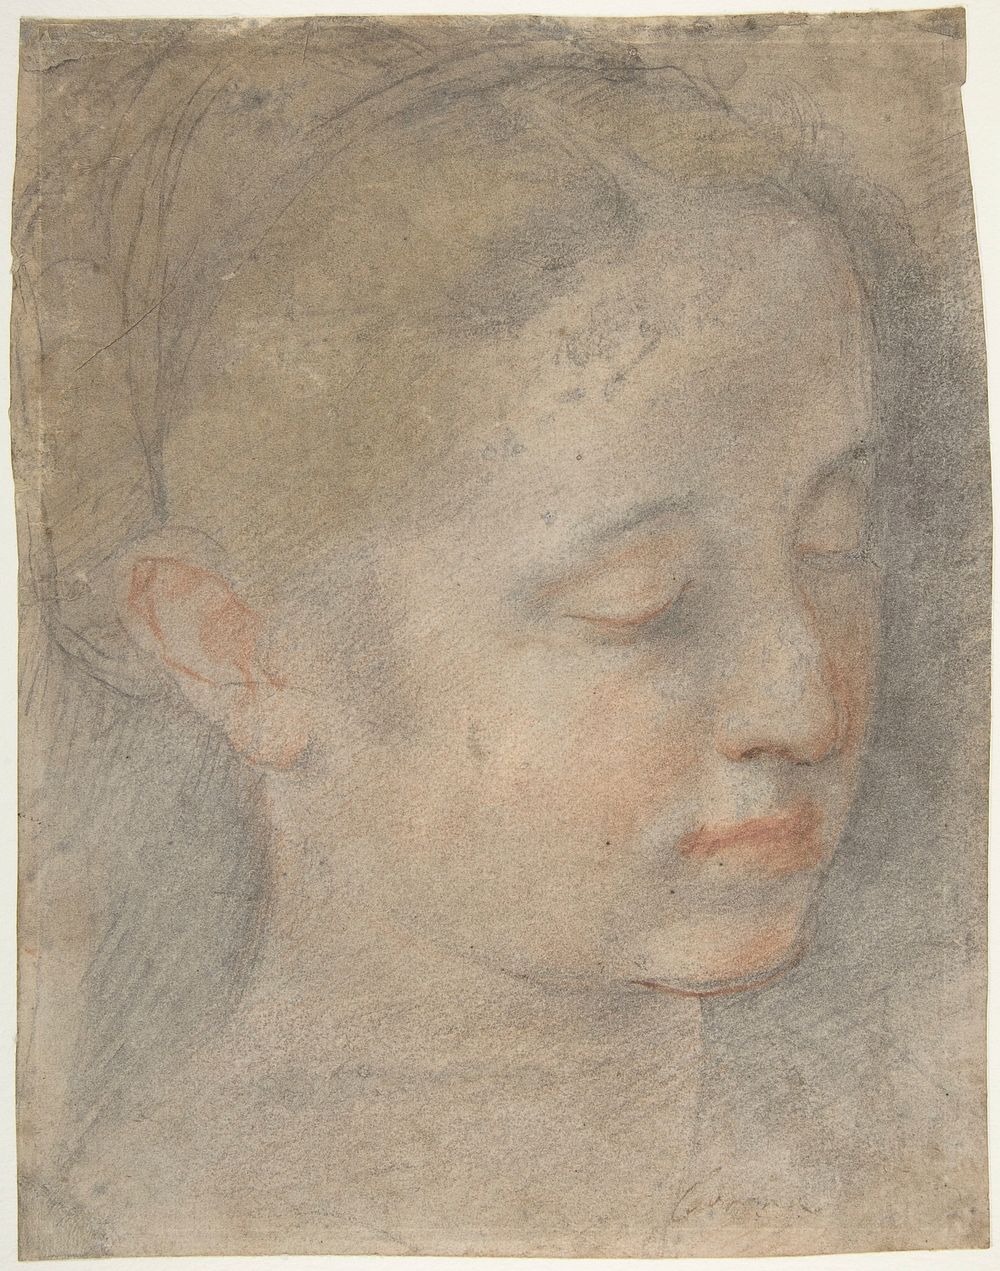 Head of a Young Woman Looking to Lower Right by Federico Barocci